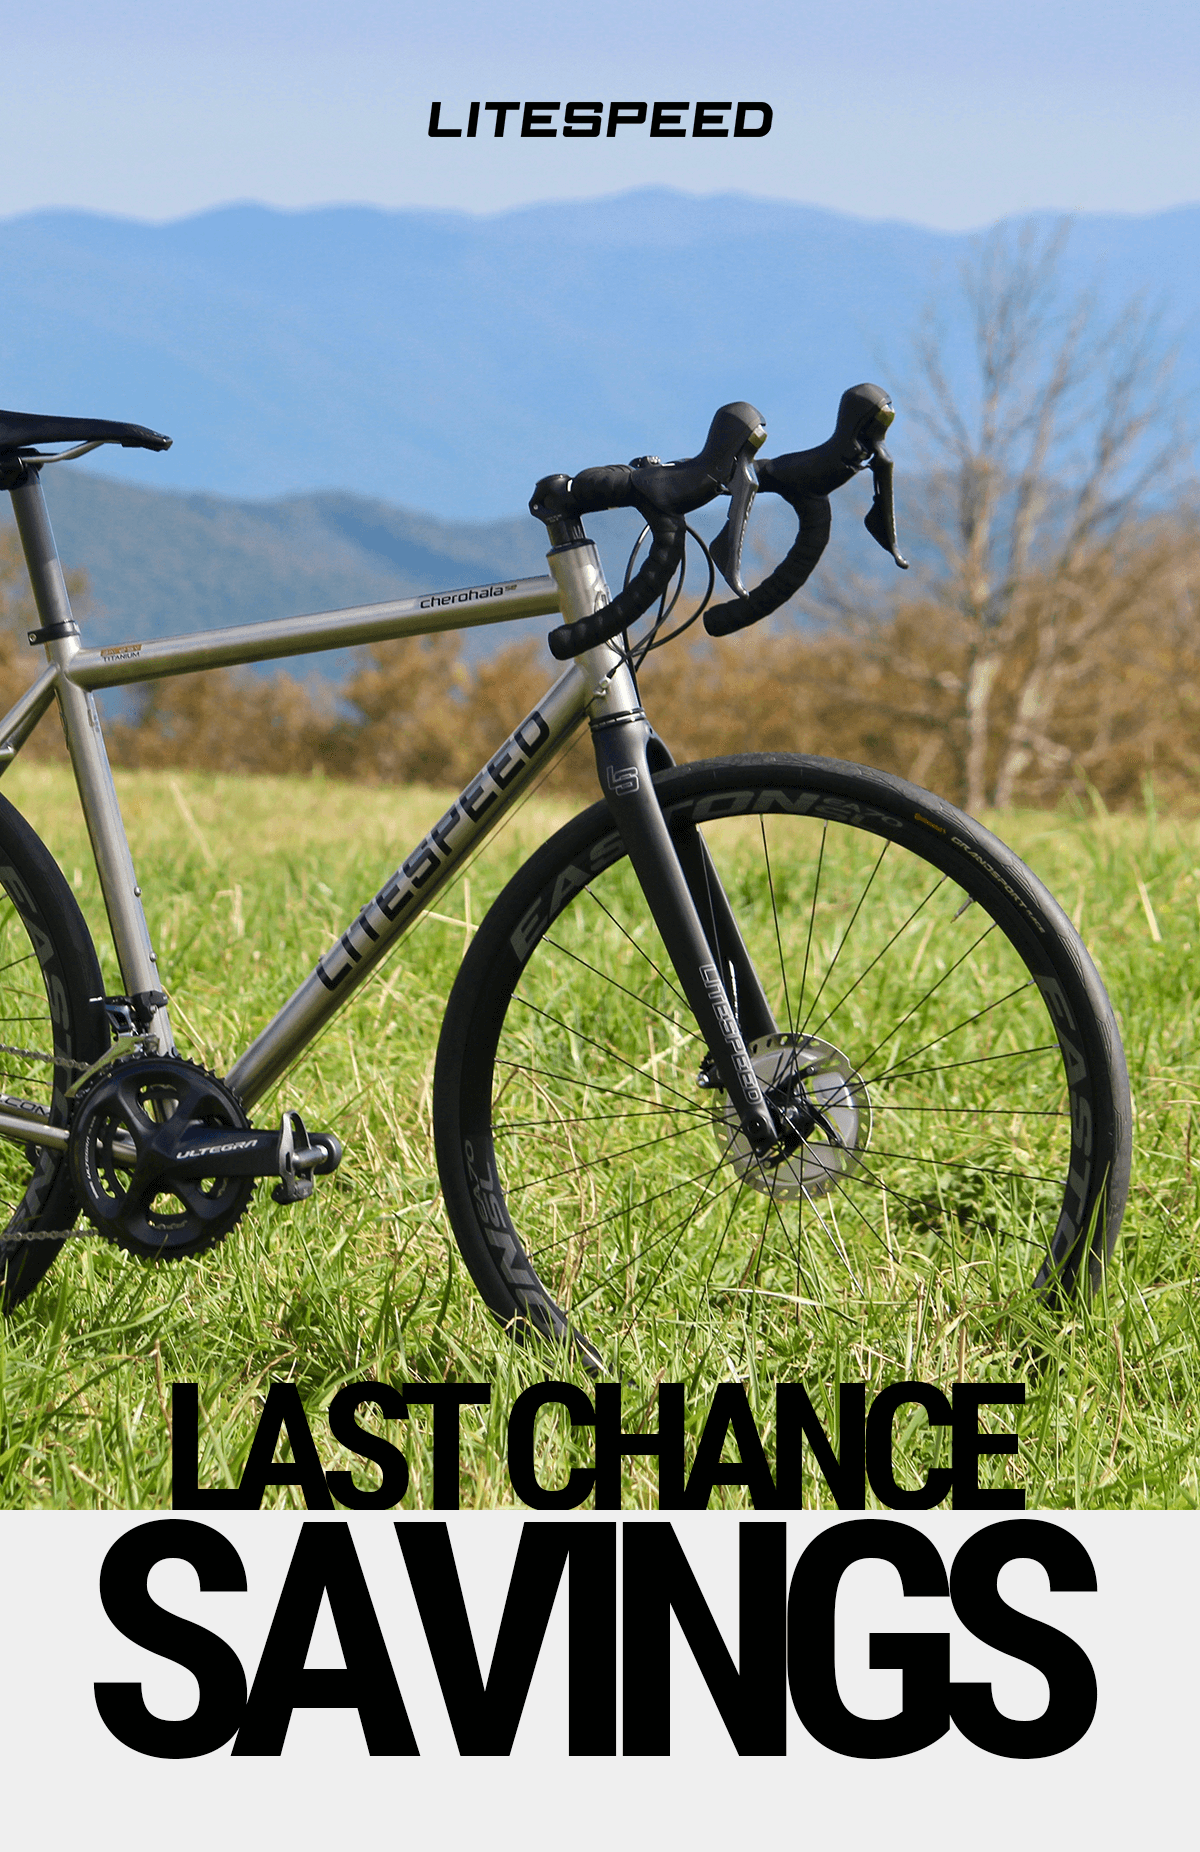 Litespeed's biggest sale of the year is coming to an end! Shop now and save up to $1975 on a new bike.